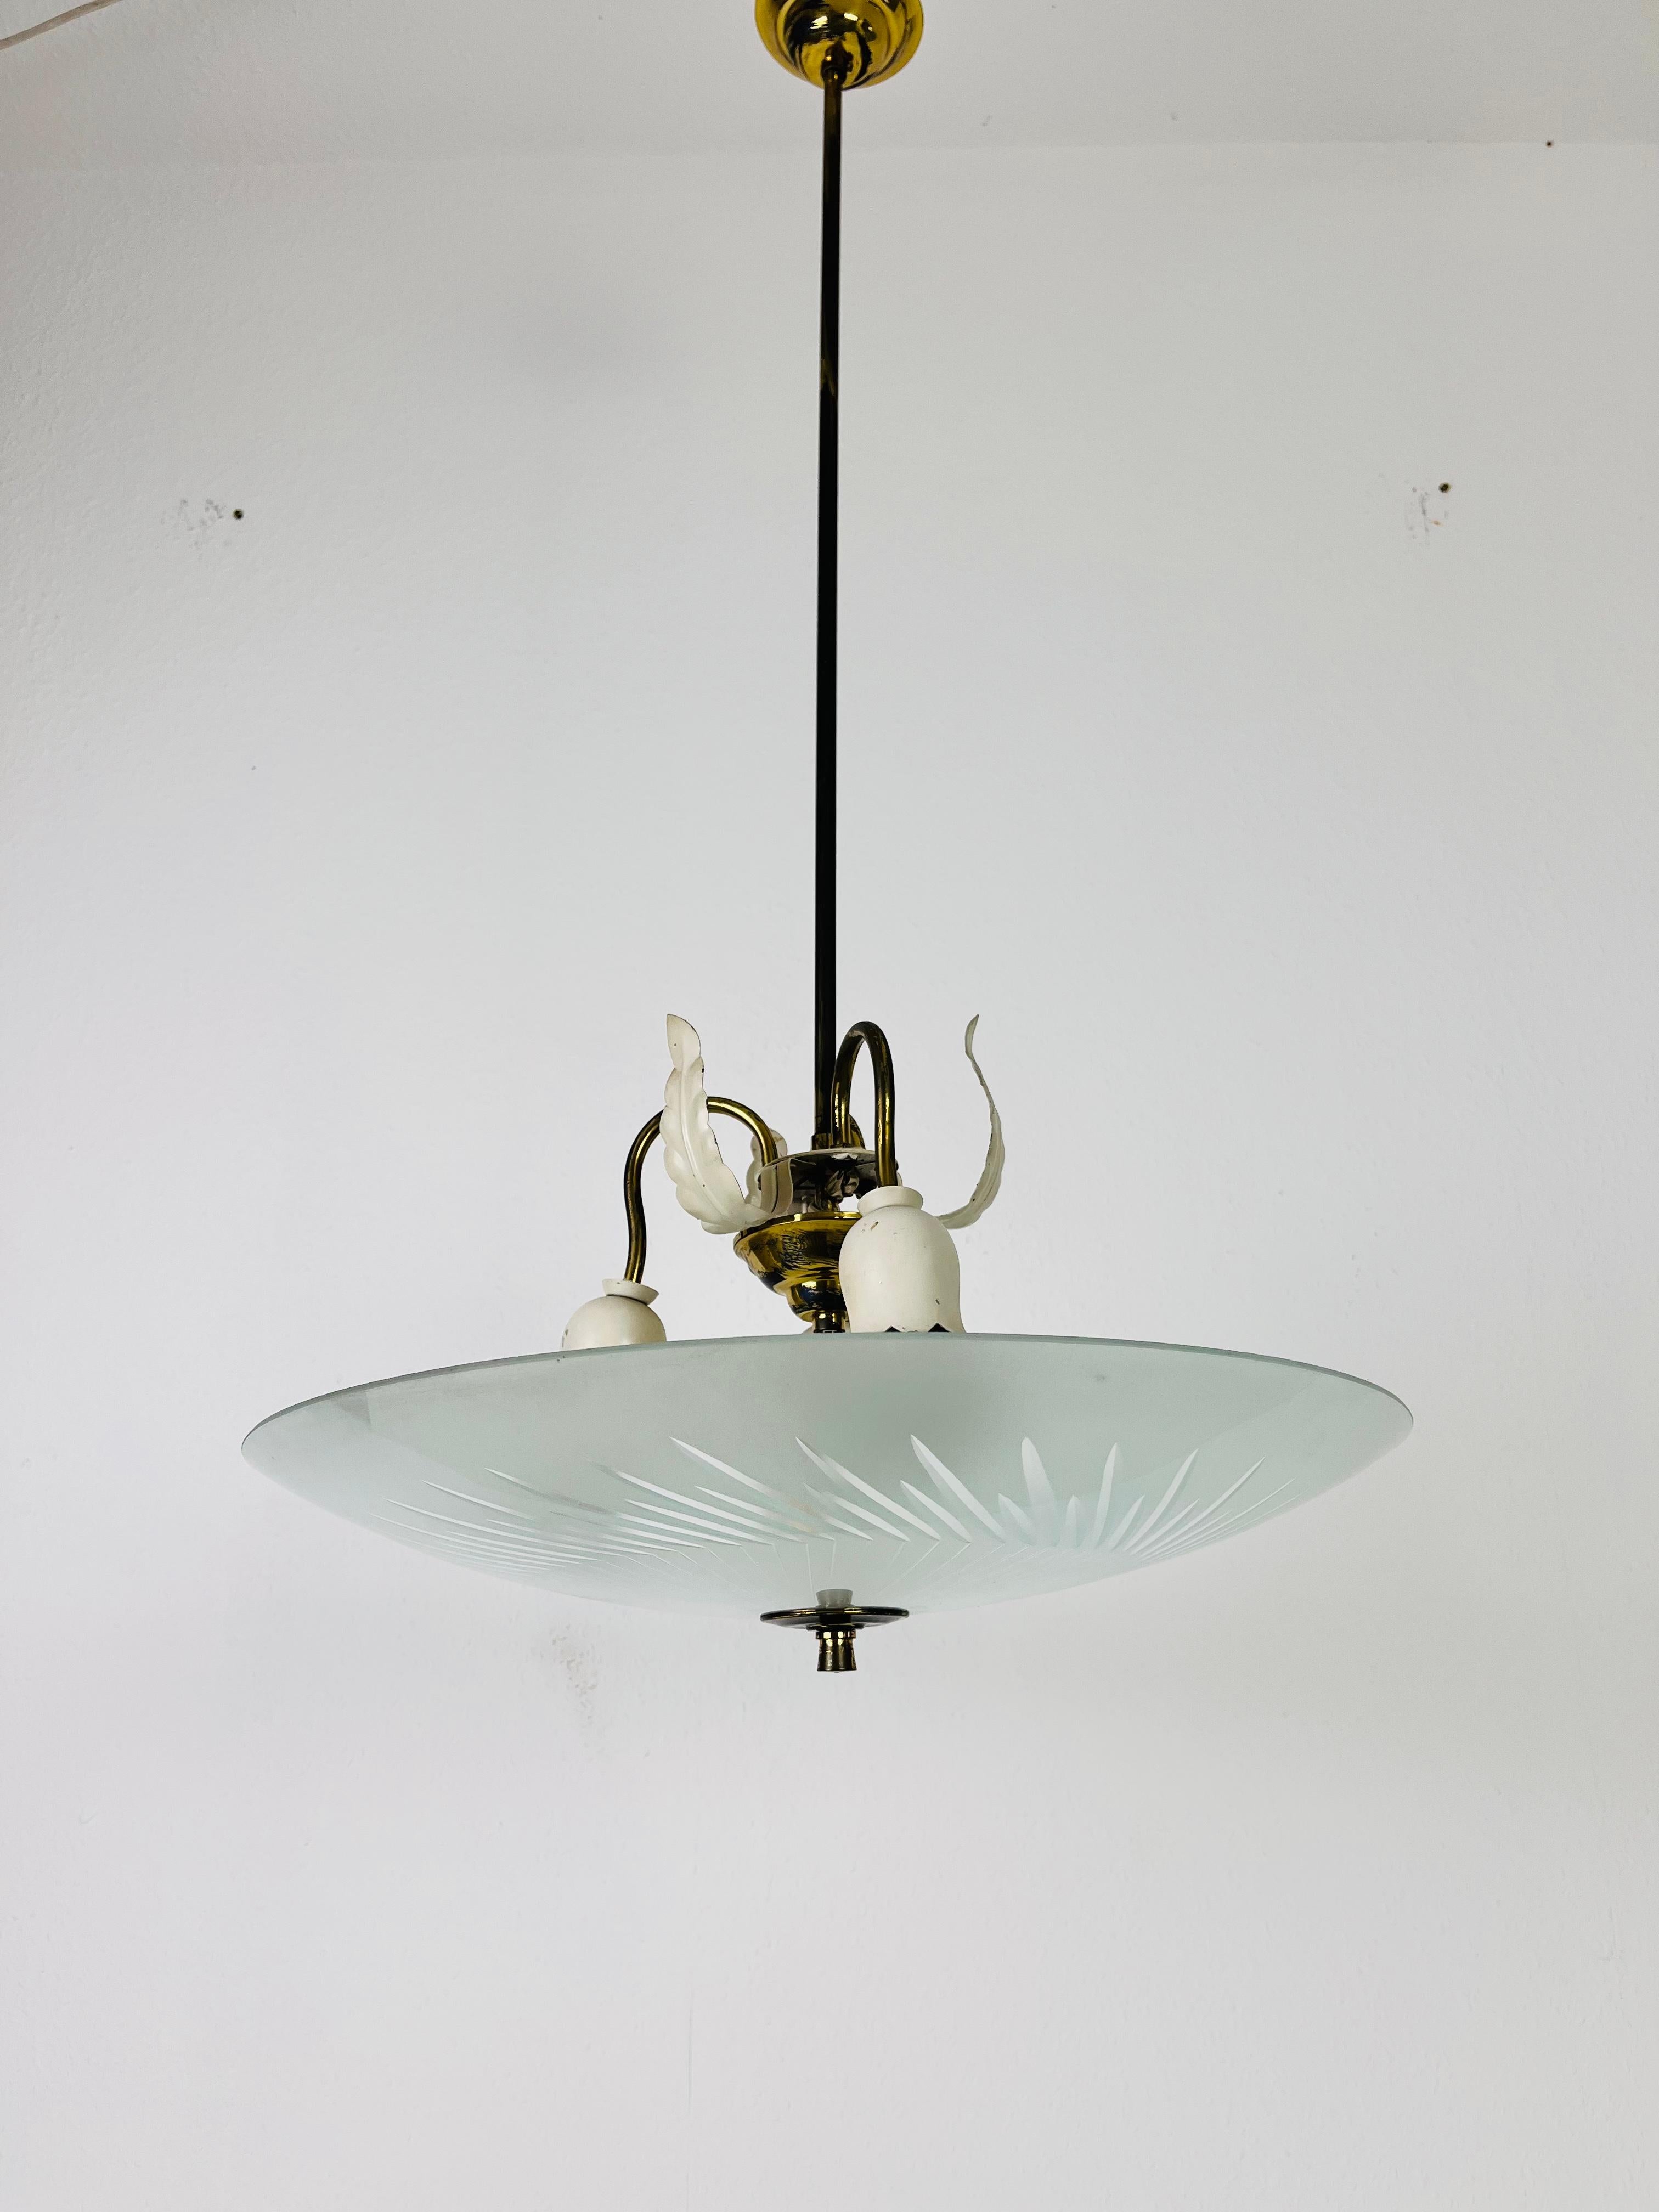 Mid-20th Century Italian Brass and Glass Chandelier in the Style of Pietro Chiesa, 1950s For Sale